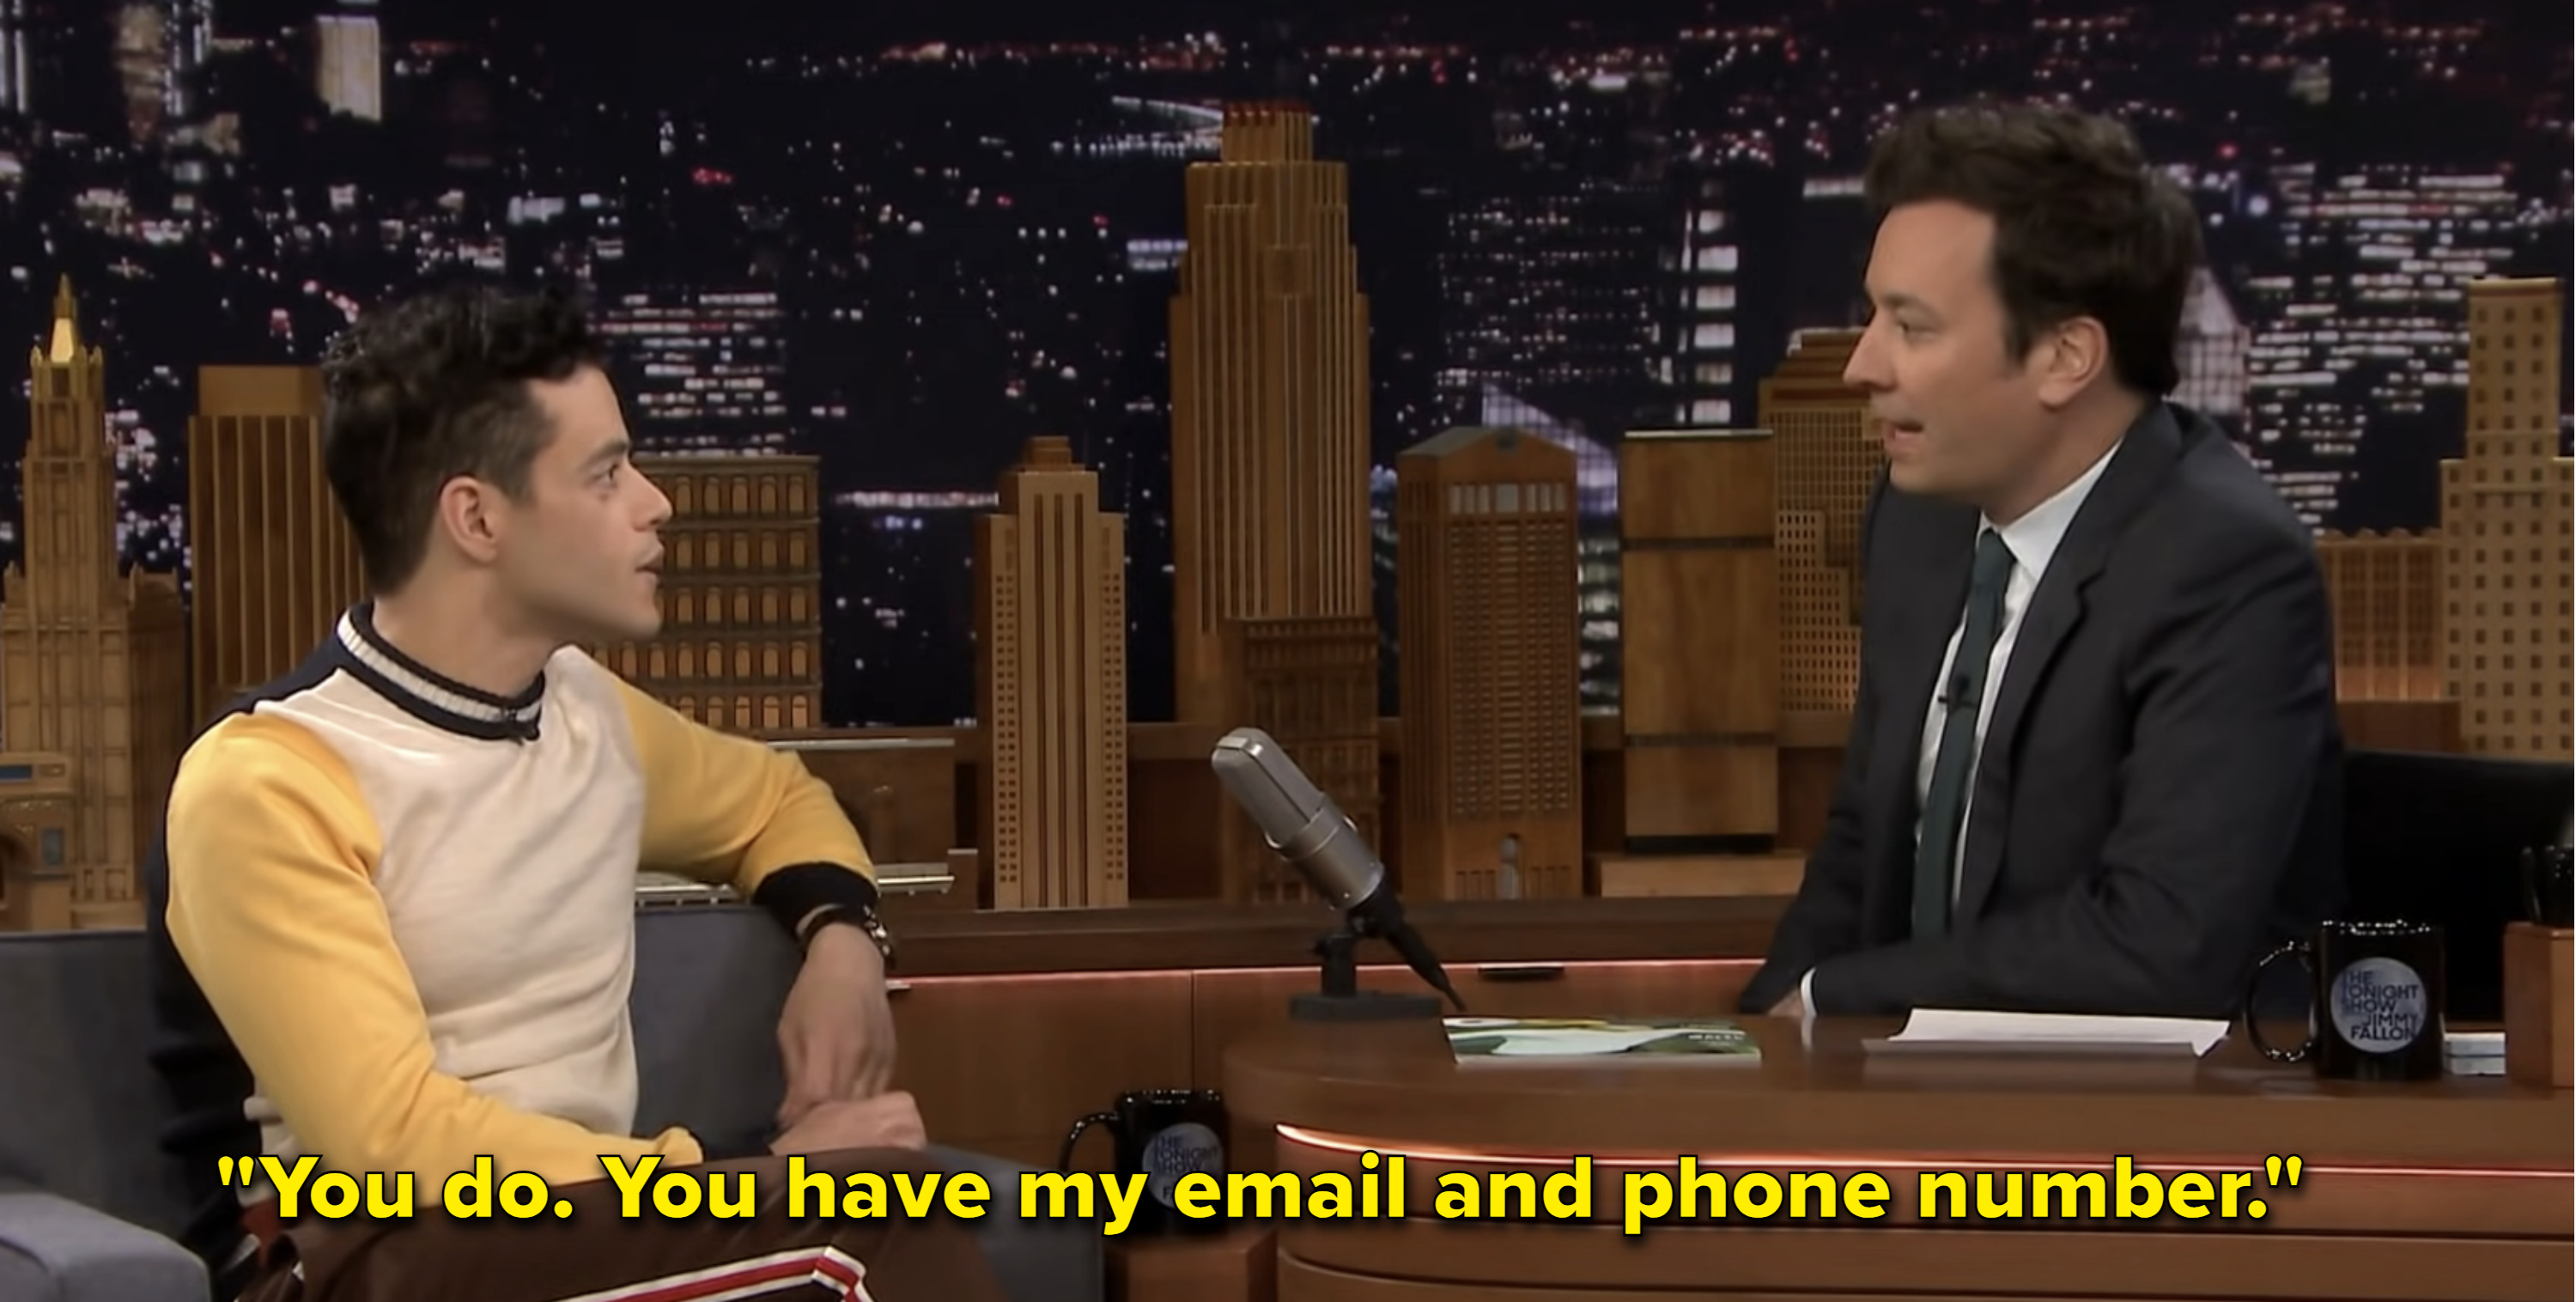 Rami Malek said, &quot;You do. You have my email and phone number&quot;